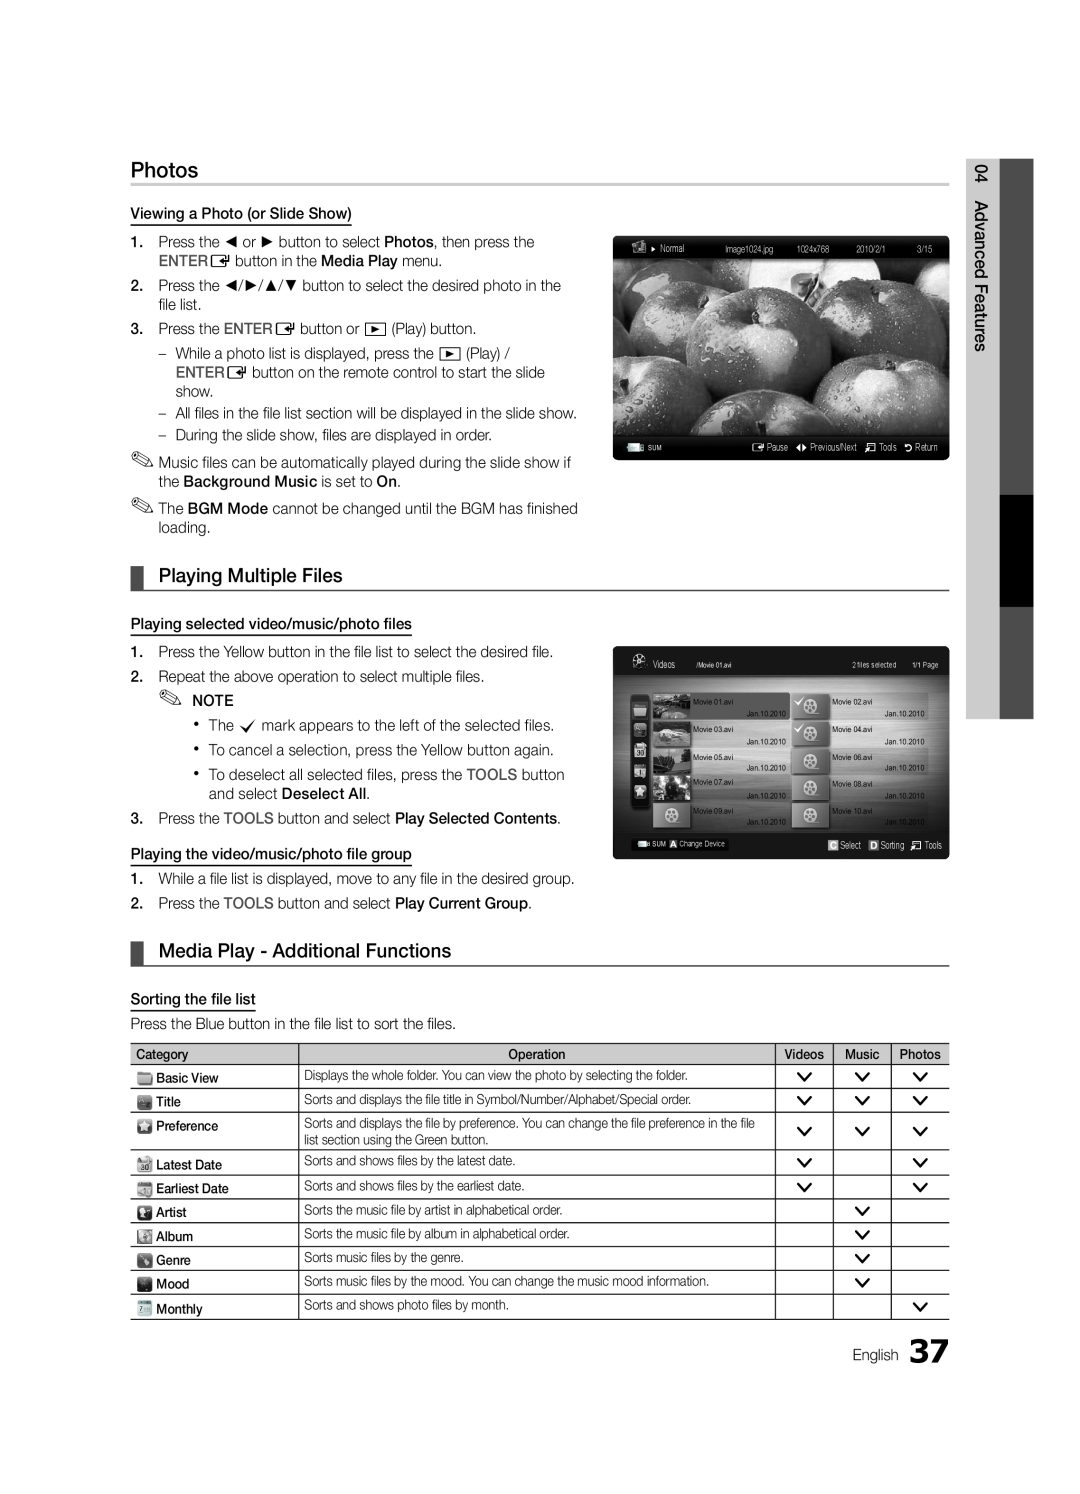 Samsung UN55C6900, BN68-02924A-02, UN46C6900 user manual Photos, Playing Multiple Files, Media Play - Additional Functions 